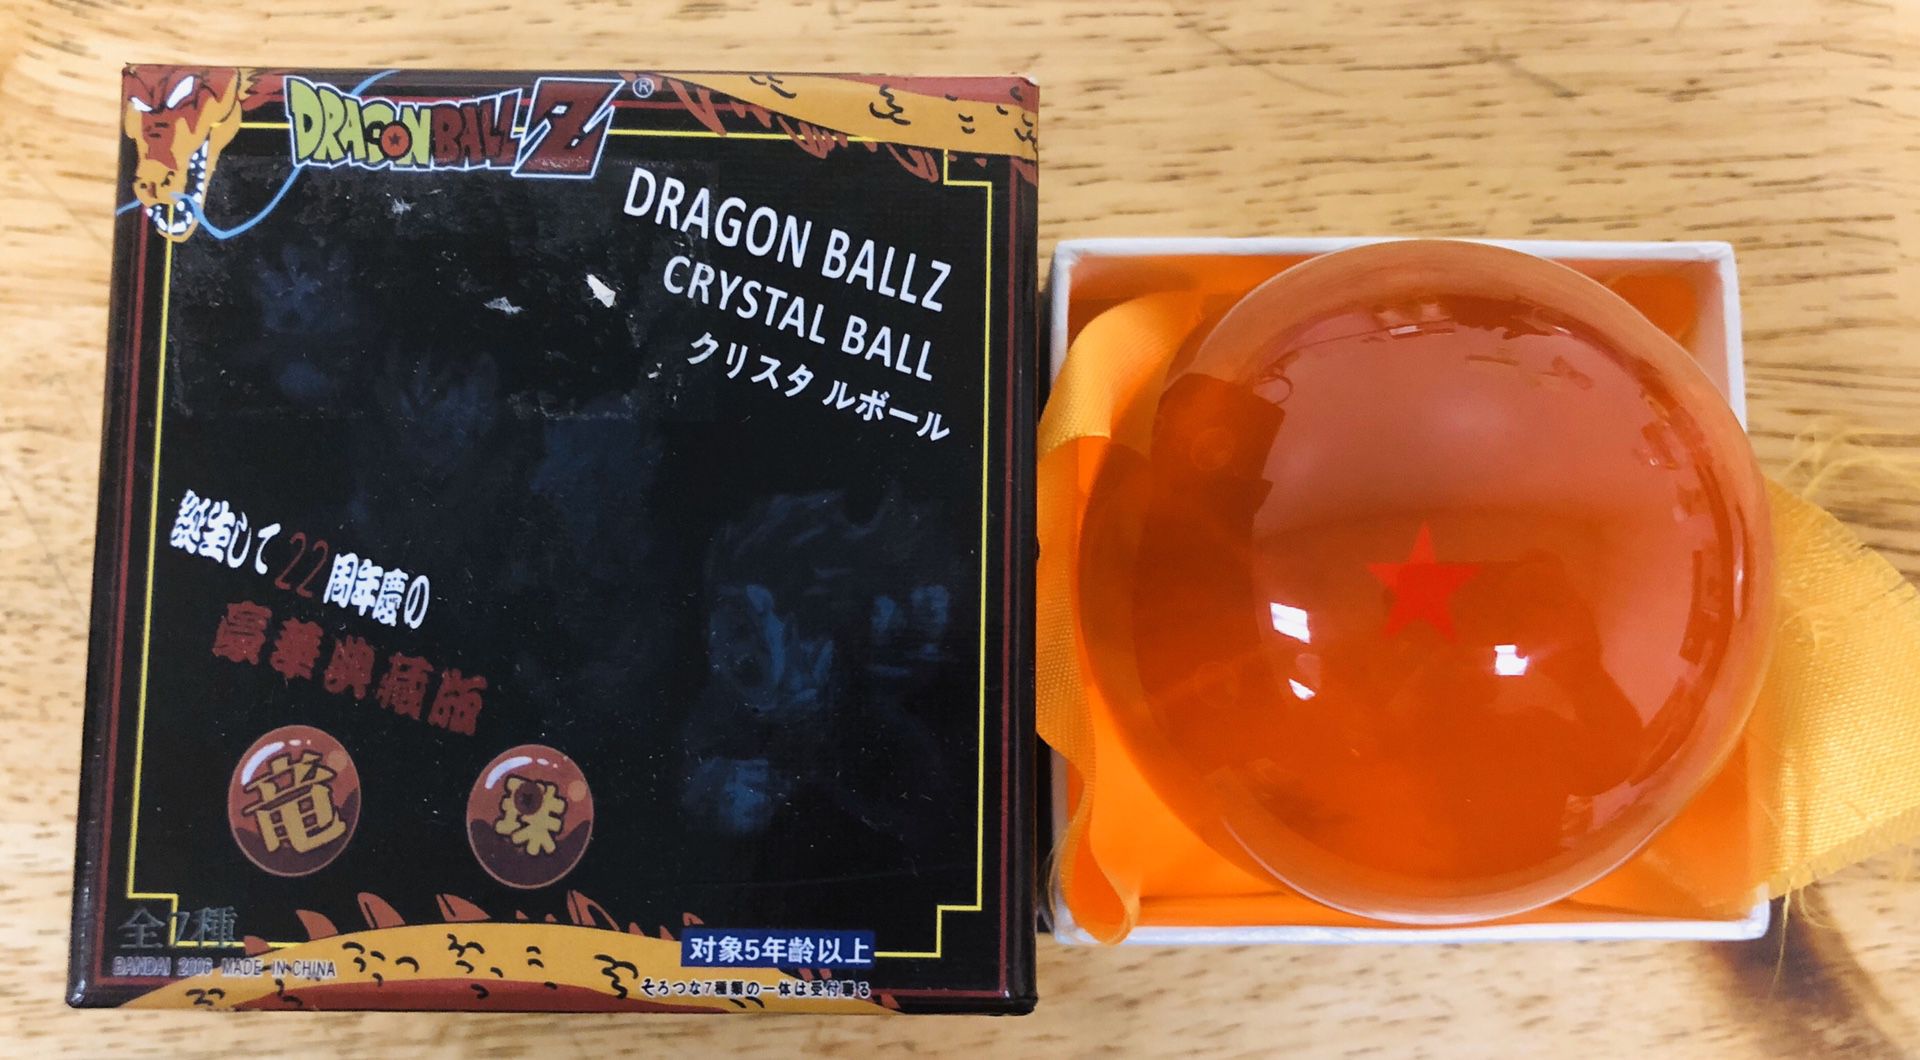 Large Dragon Ball Z Crystal Ball - 76mm - 1 Star - Brand New In the Box